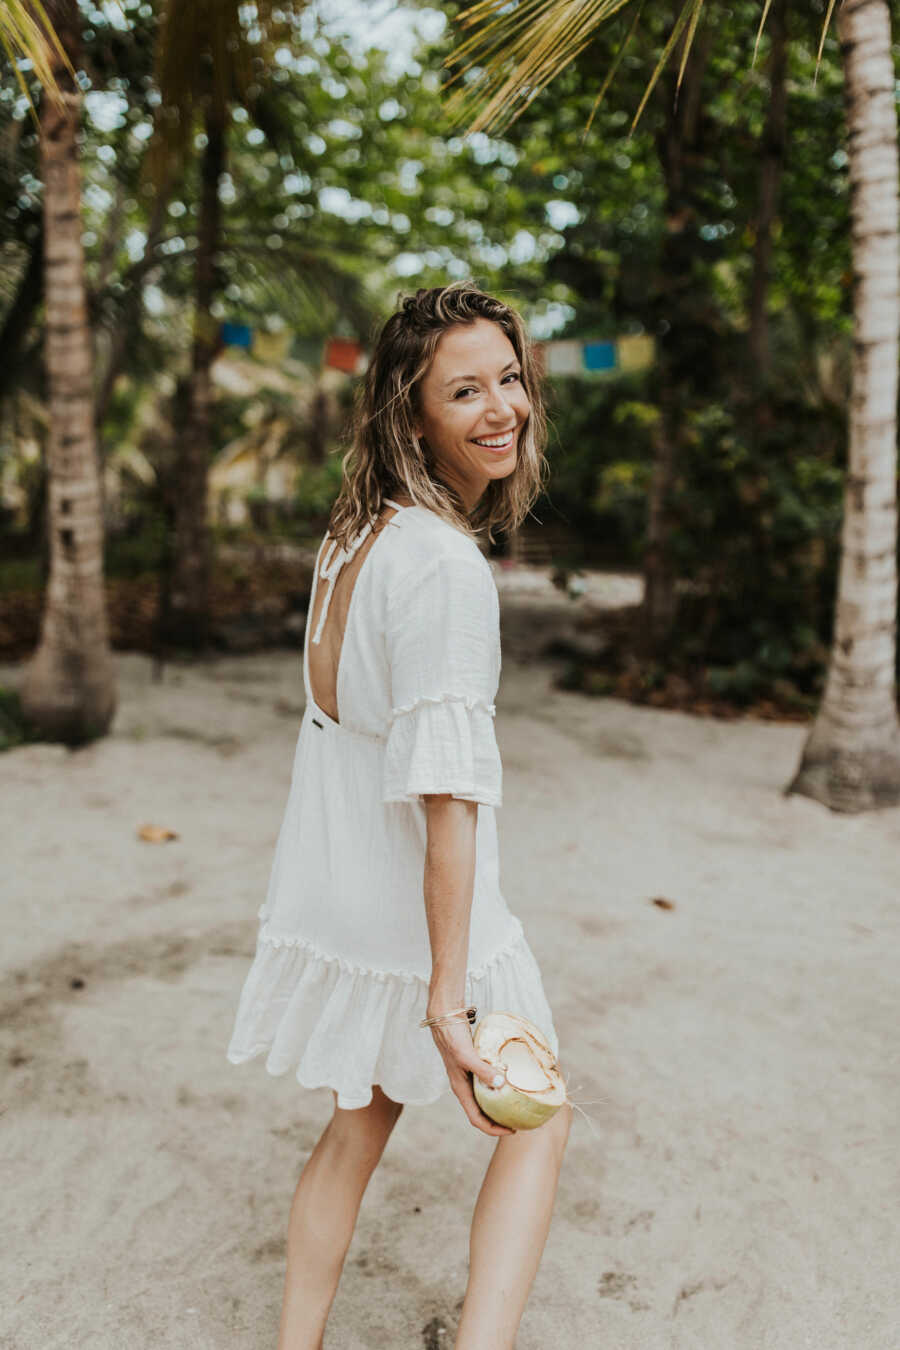 woman walking in the beach with half a coconut in her hand wearing a short white dress